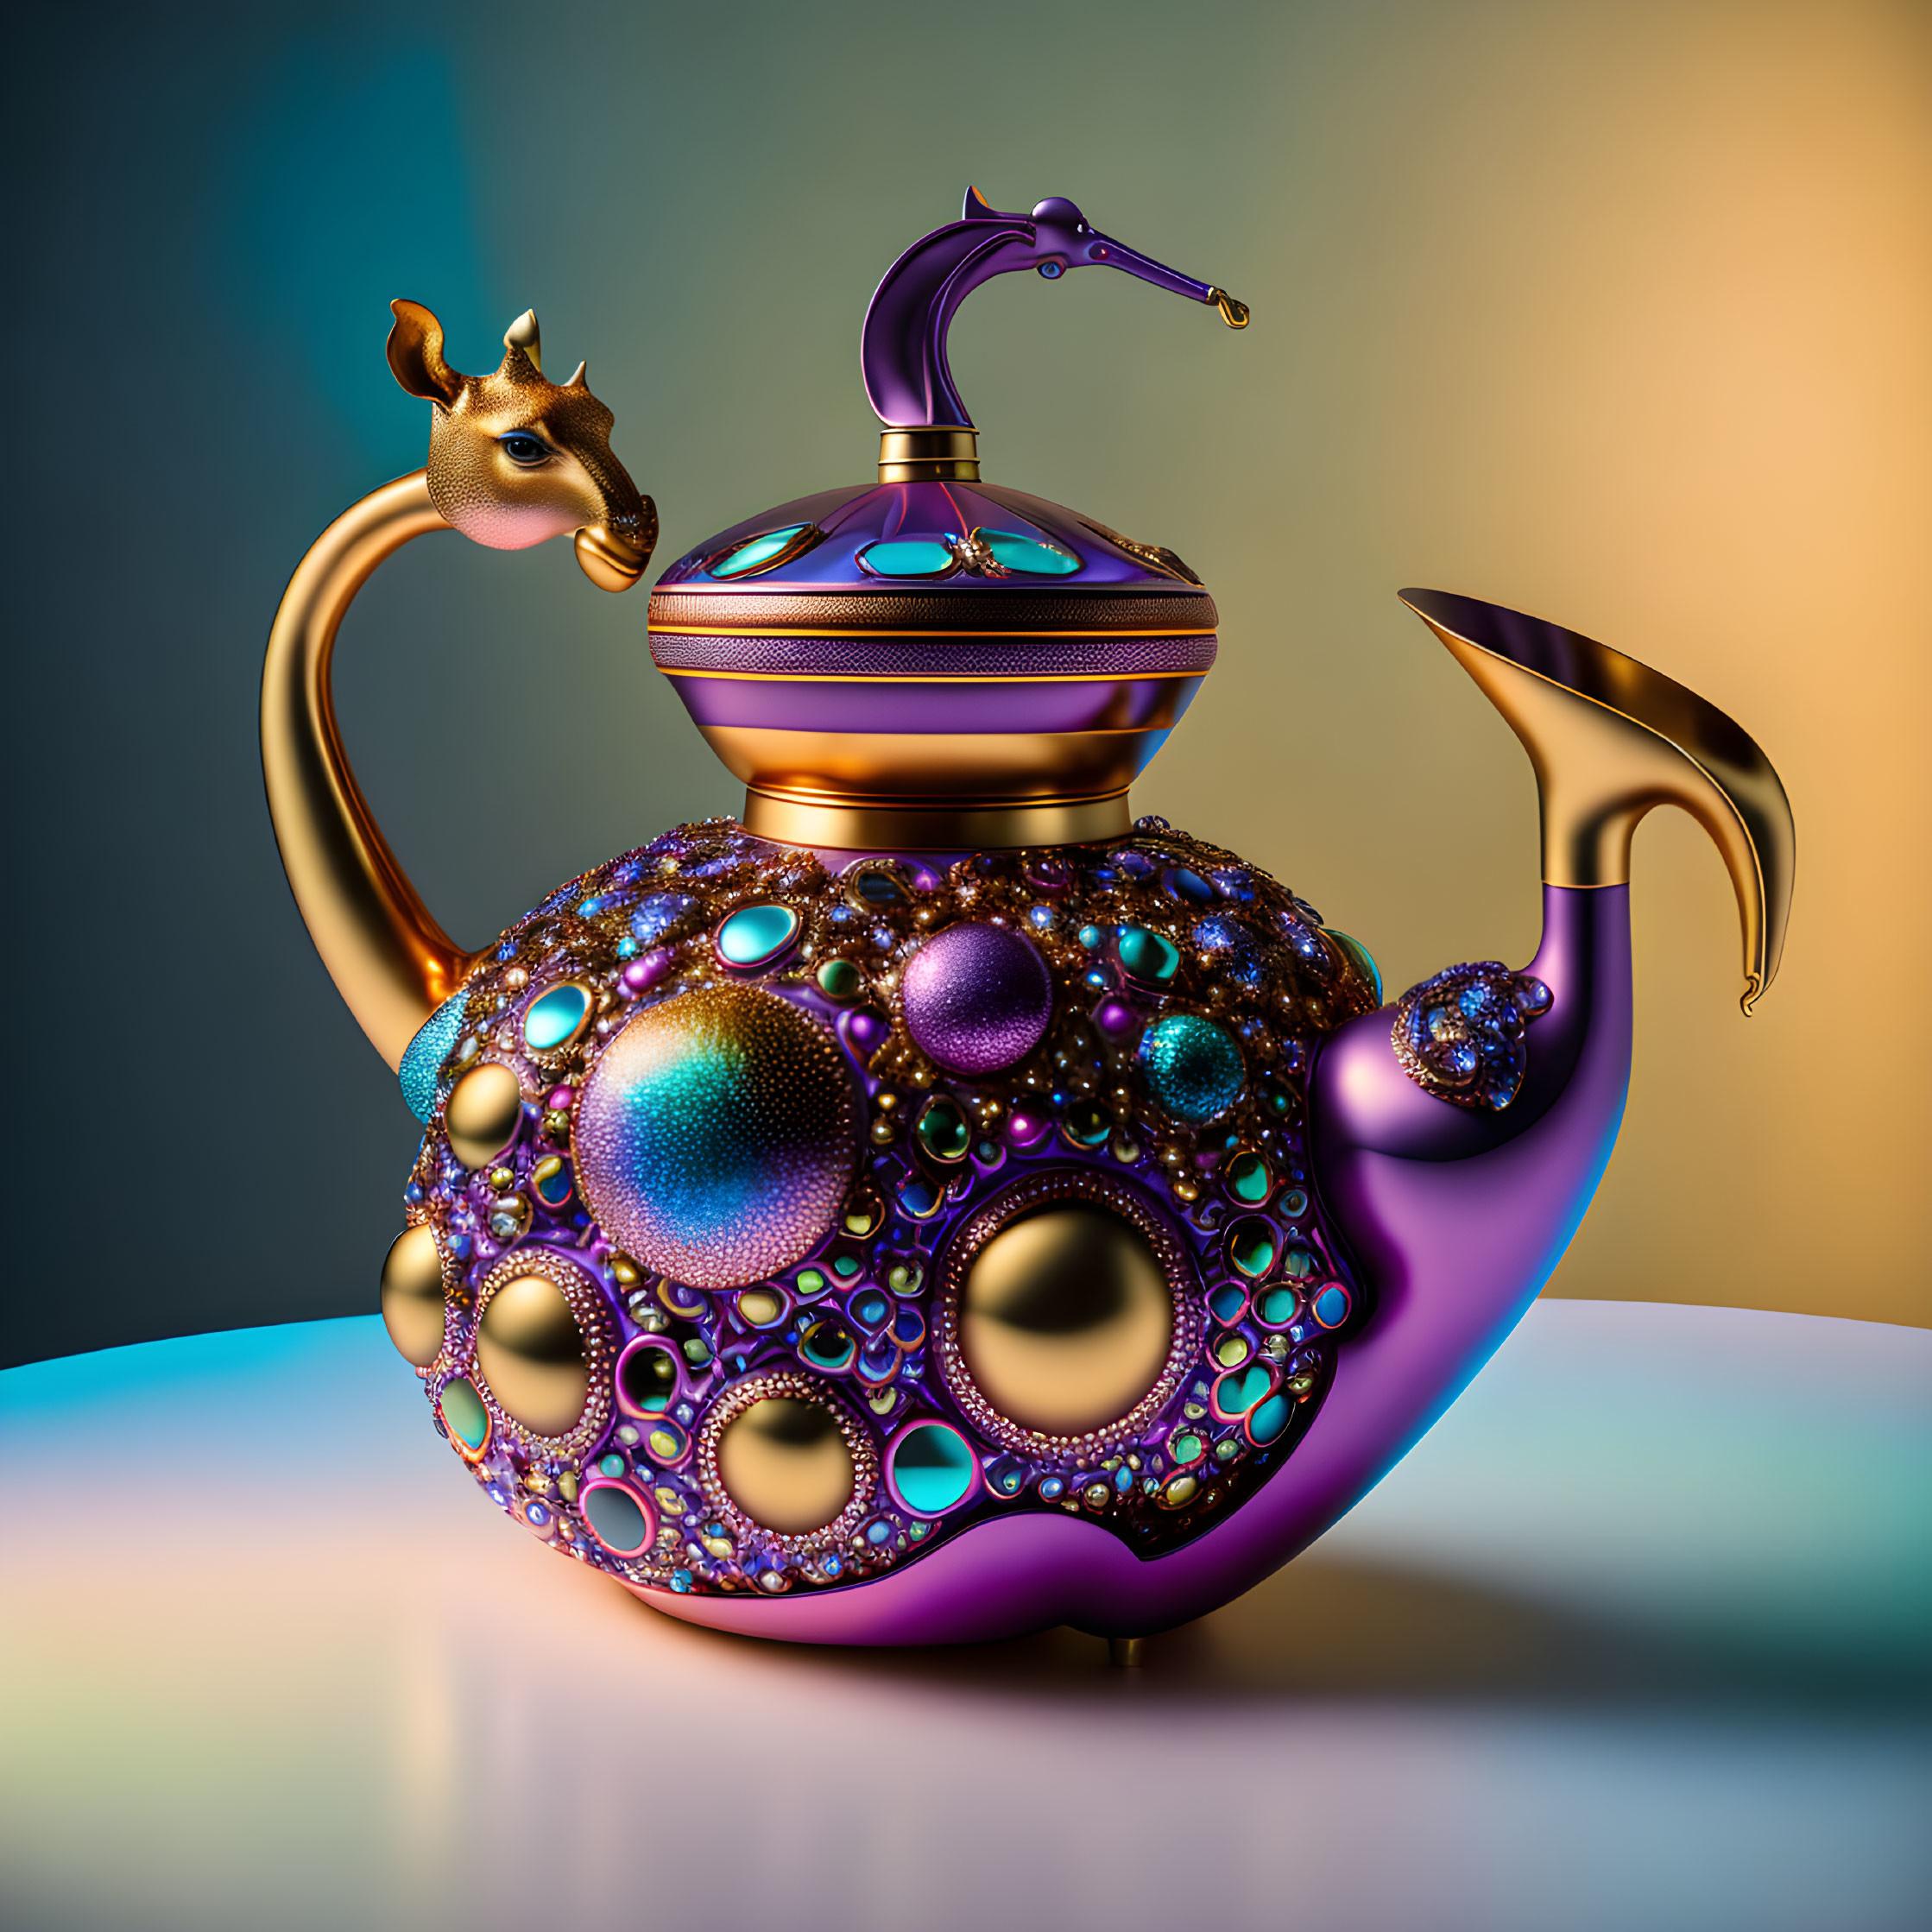 Colorful Giraffe-Head Teapot with Jeweled Body on Gradient Background